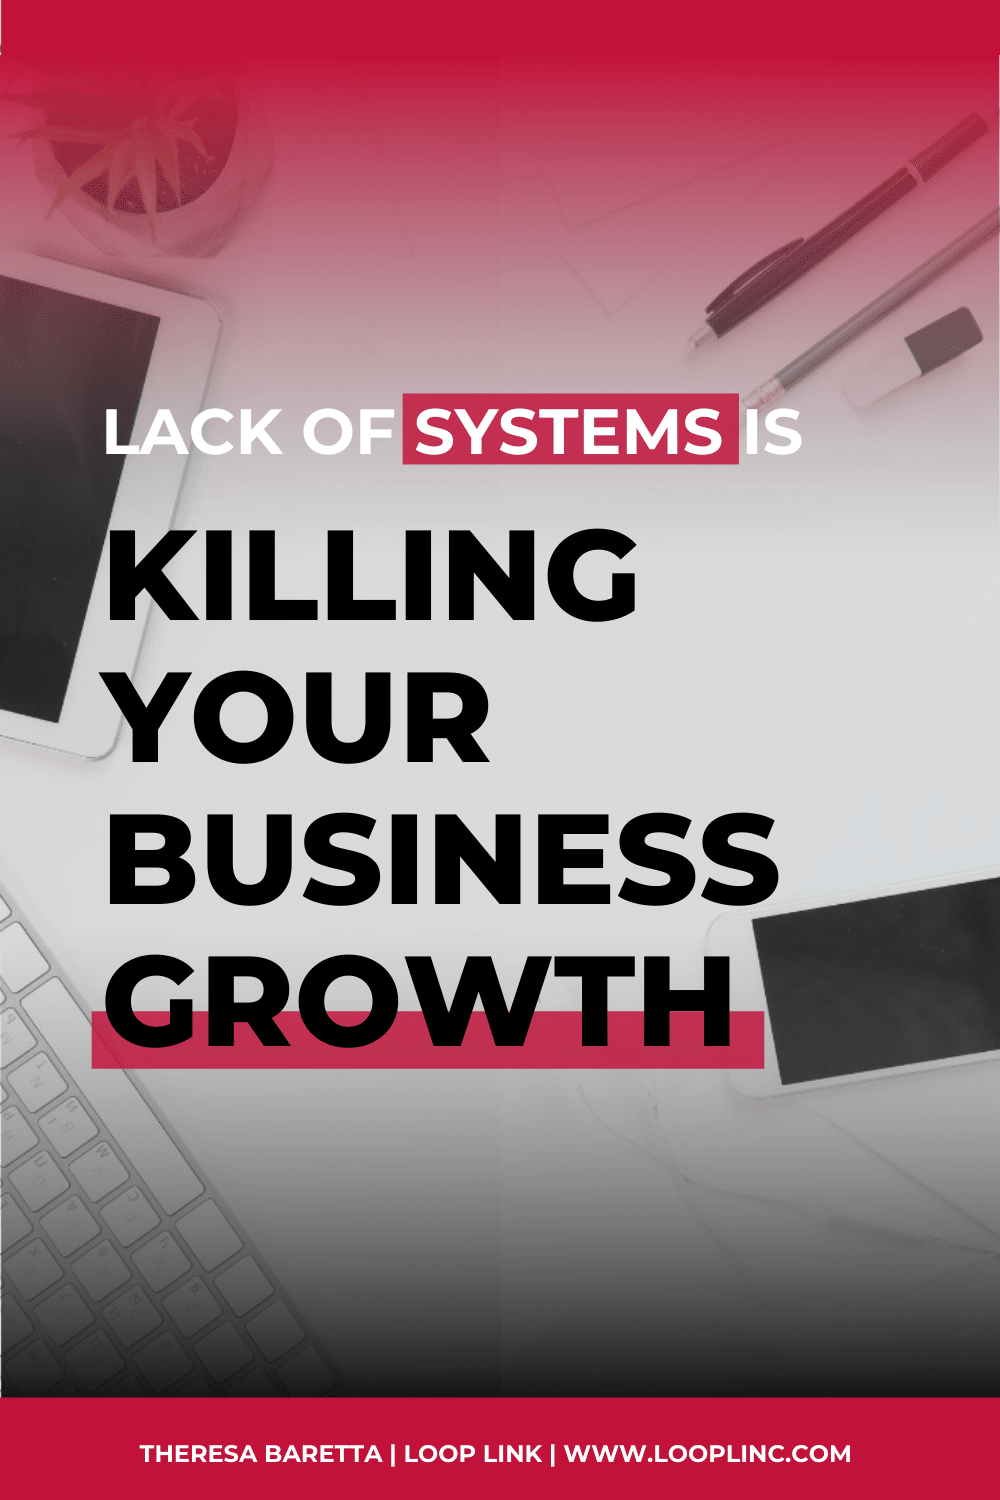 Lack of systems is killing your business growth